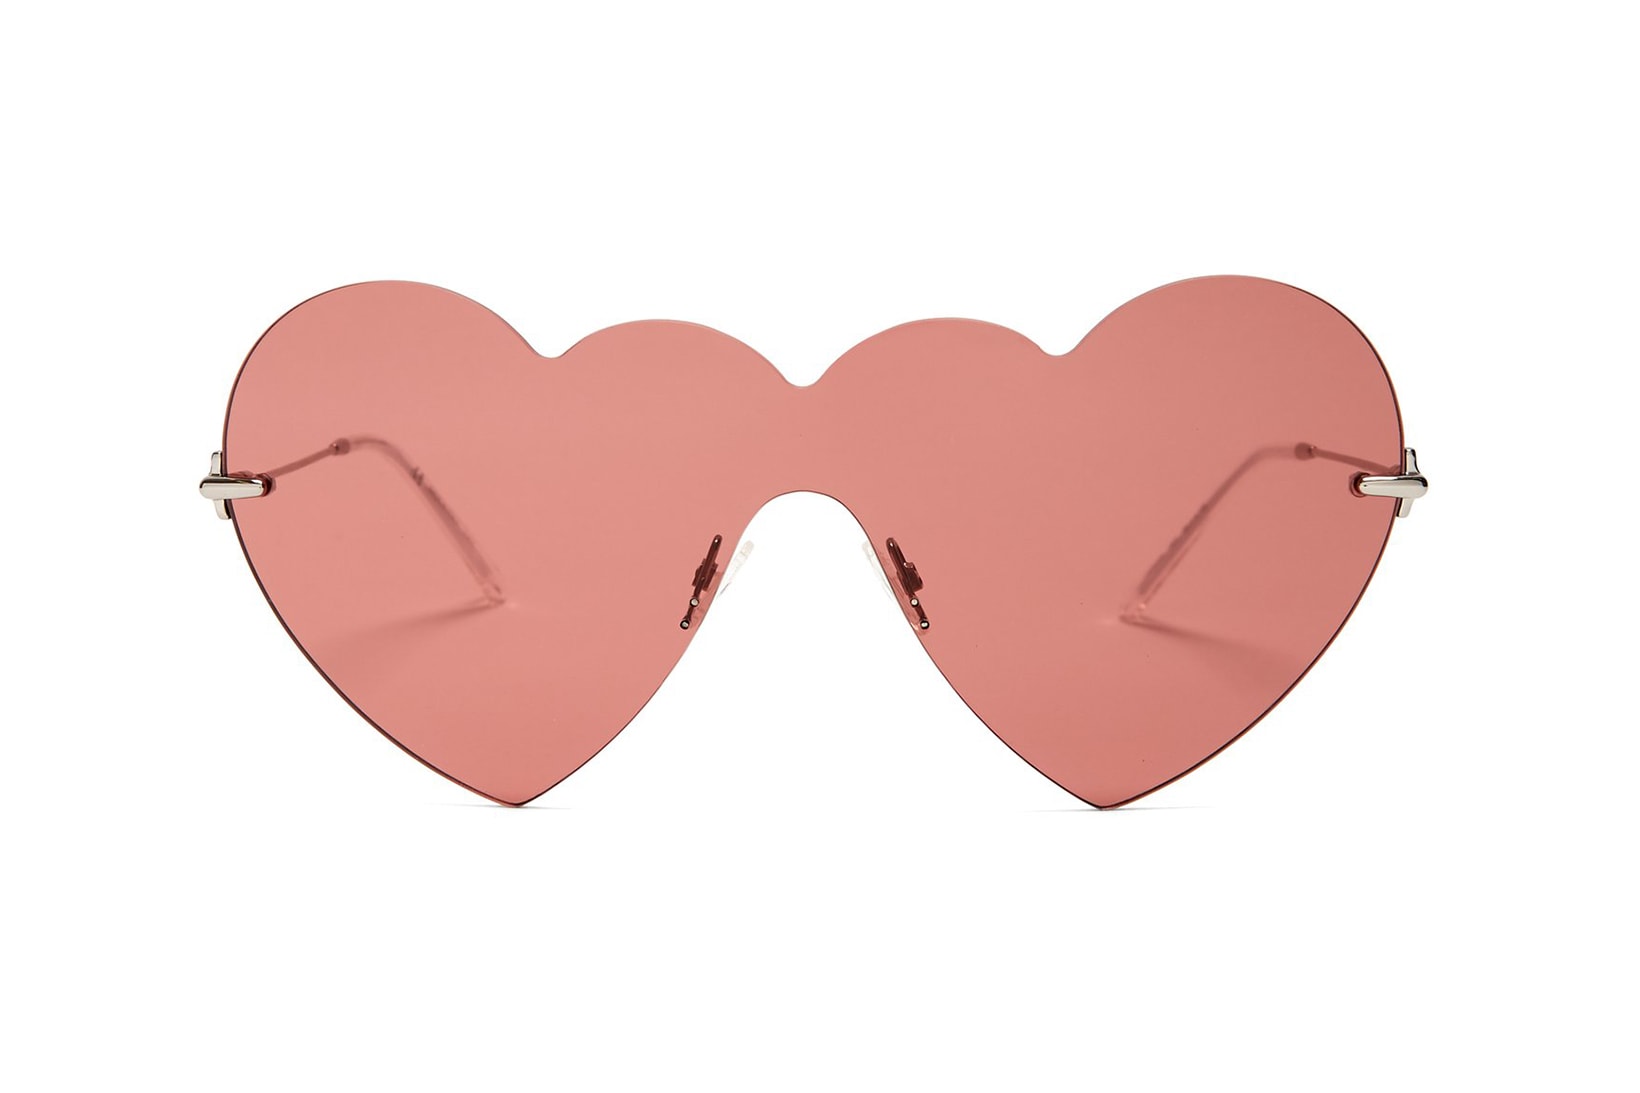 Christopher Kane Heart-Shaped Sunglasses Shades Heart Glasses Pastel Pink Red Blue Rimless where to buy matchesfashion.com